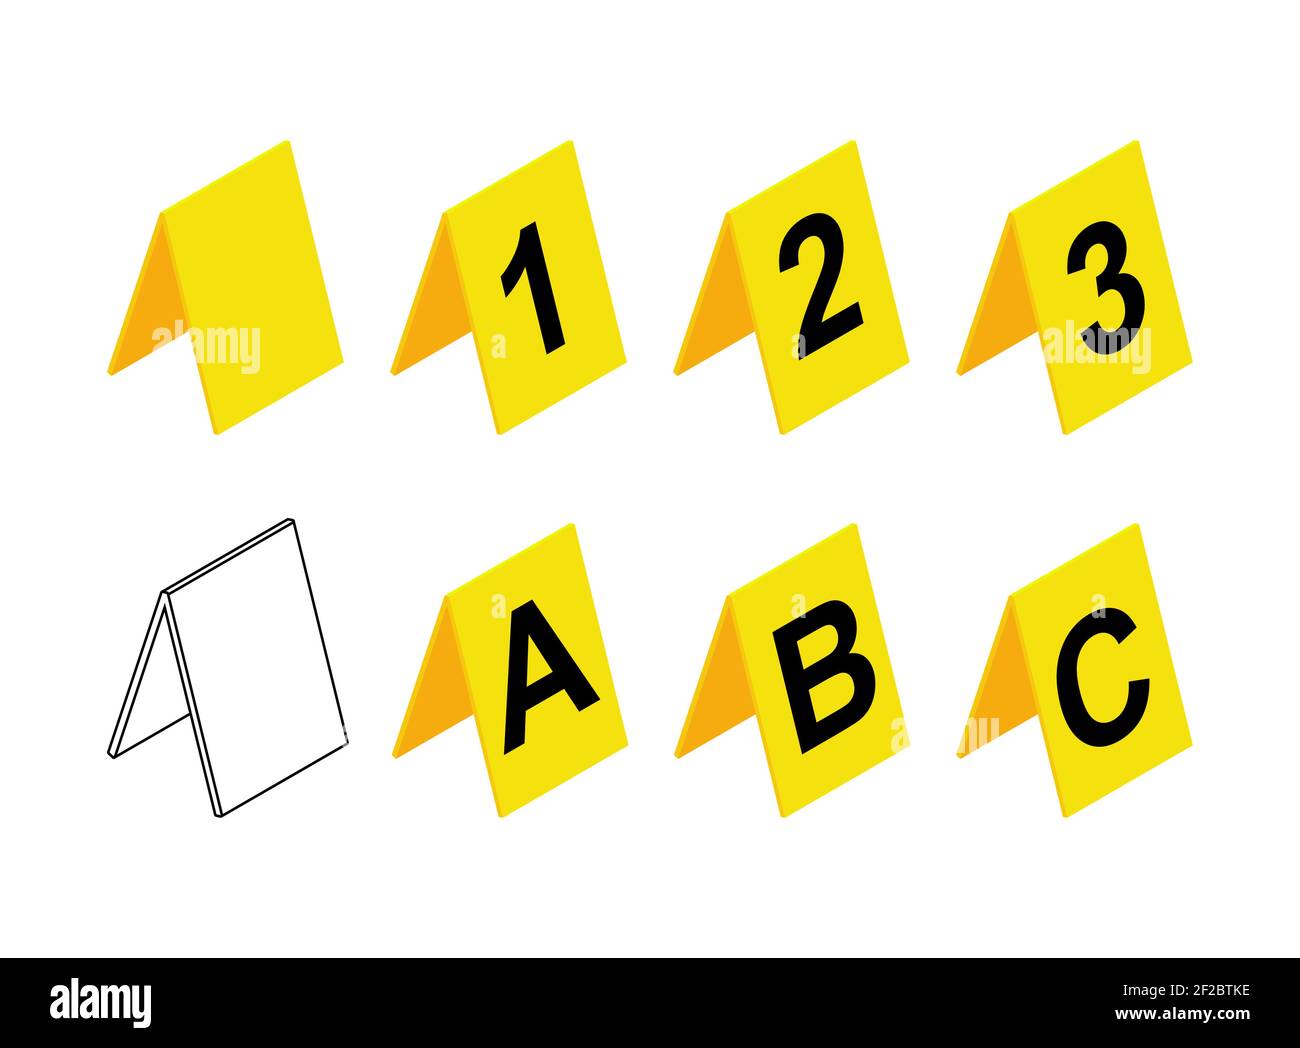 Crime scene markers design. Plastic yellow  investigation label icon set with letter A, B, C and number 1,2,3. Contains also empty or blank symbol. Ve Stock Vector